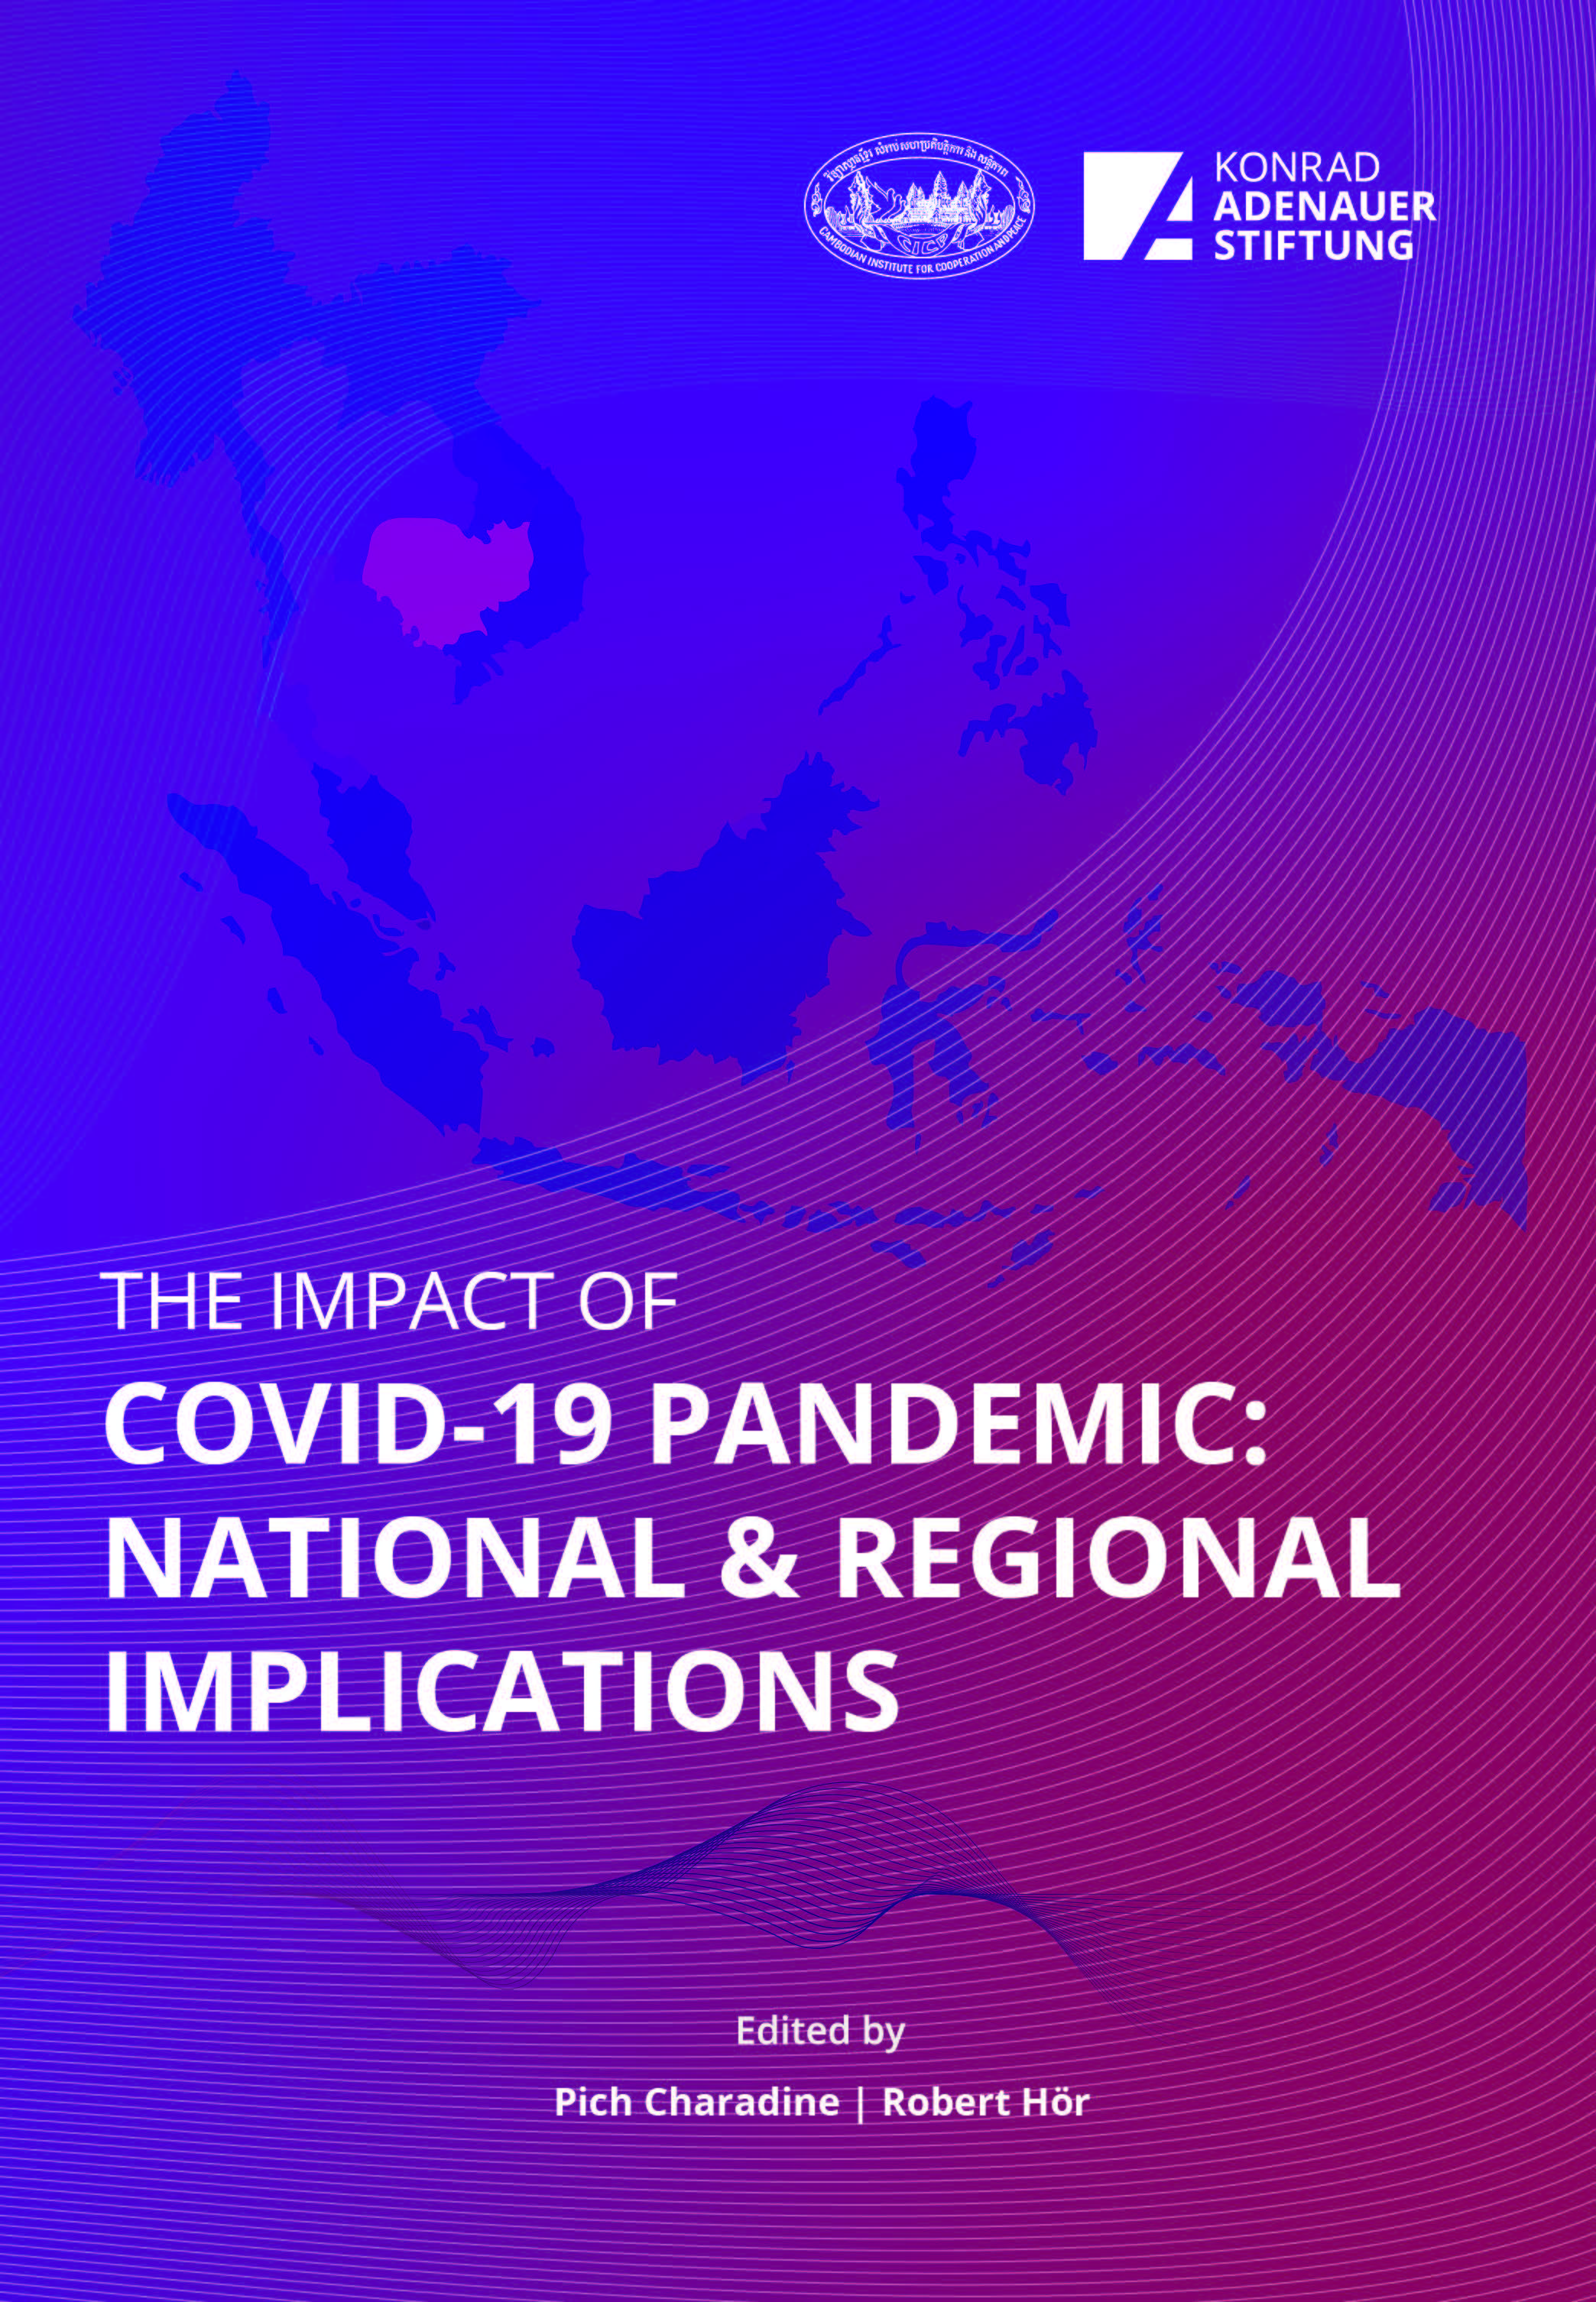 The Impact of Covid-19: National and Regional Implications